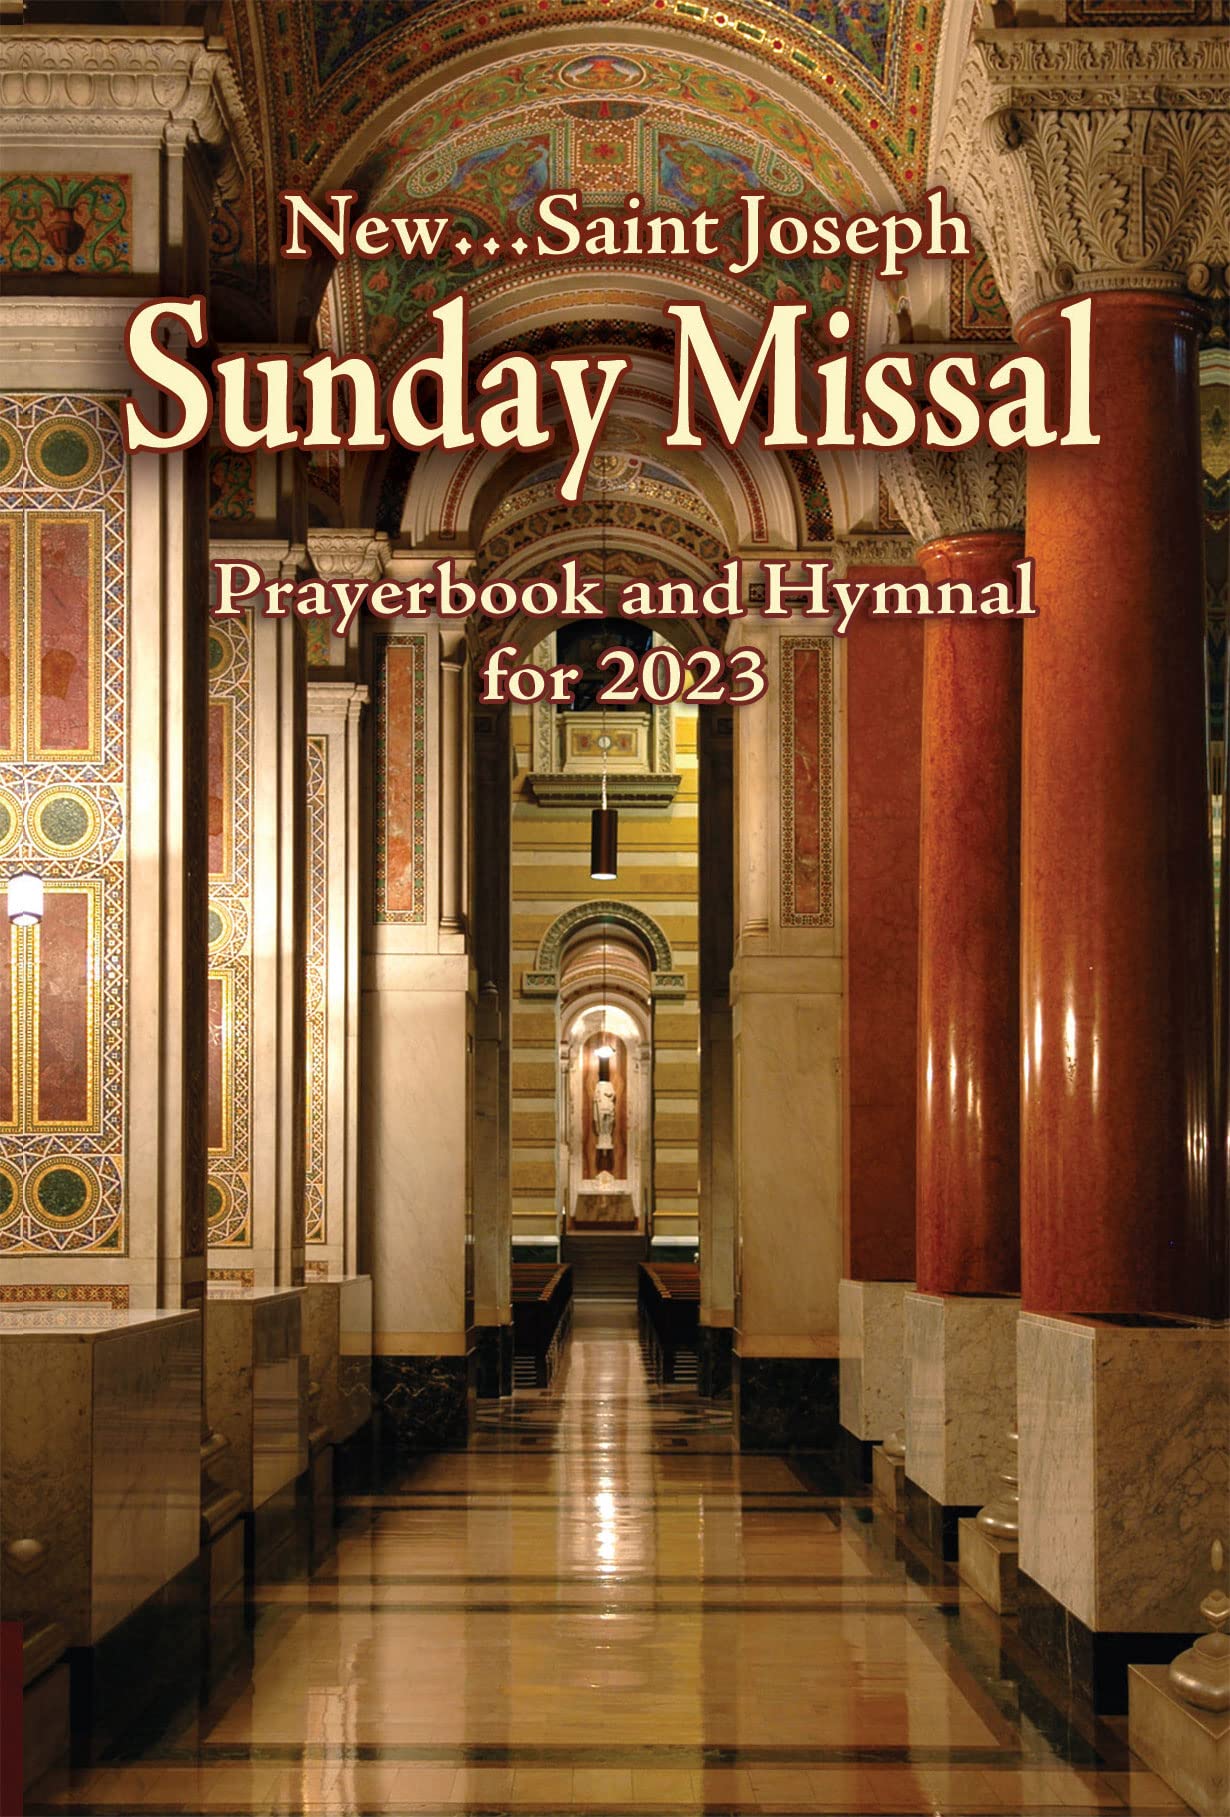 St. Joseph Sunday Missal Prayerbook and Hymnal for 2023: American Edition